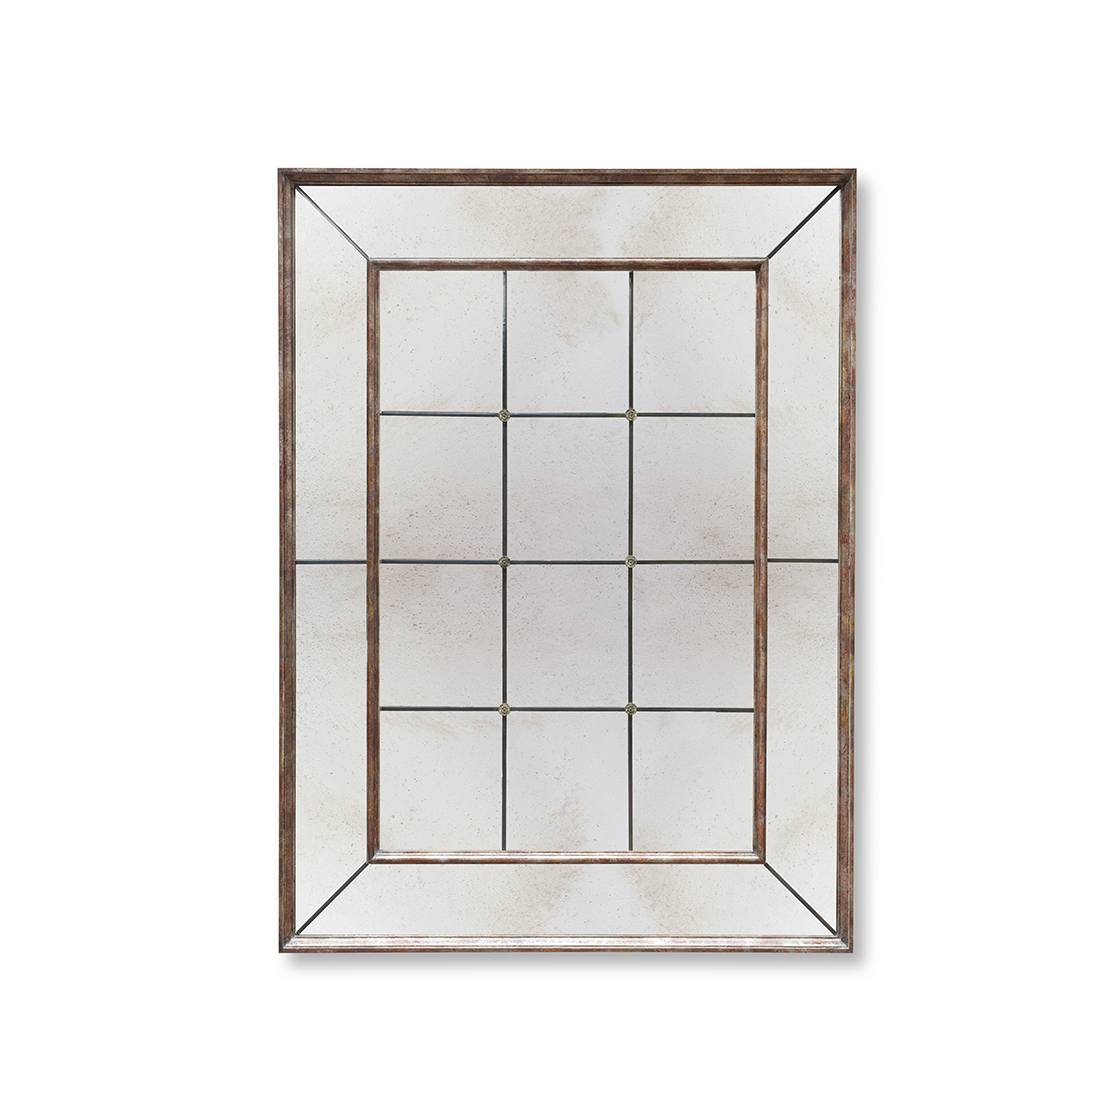 Panelled mirror in Light oxidised real silver - Beaumont & Fletcher